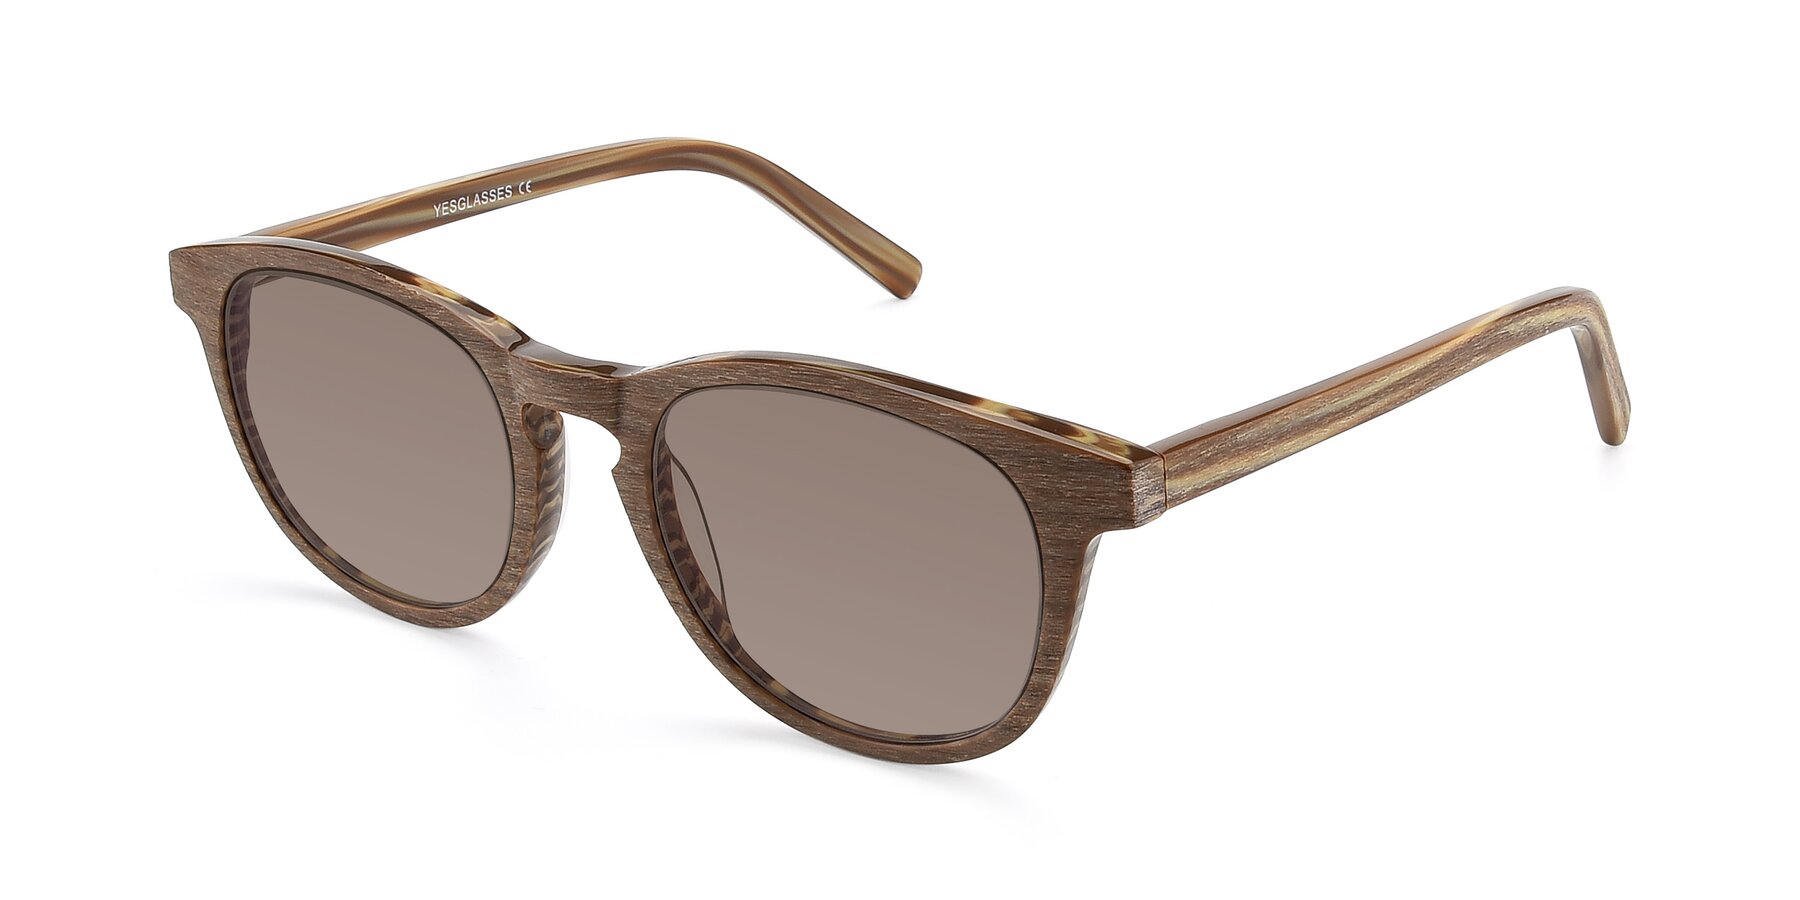 Angle of SR6044 in Brown-Wooden with Medium Brown Tinted Lenses